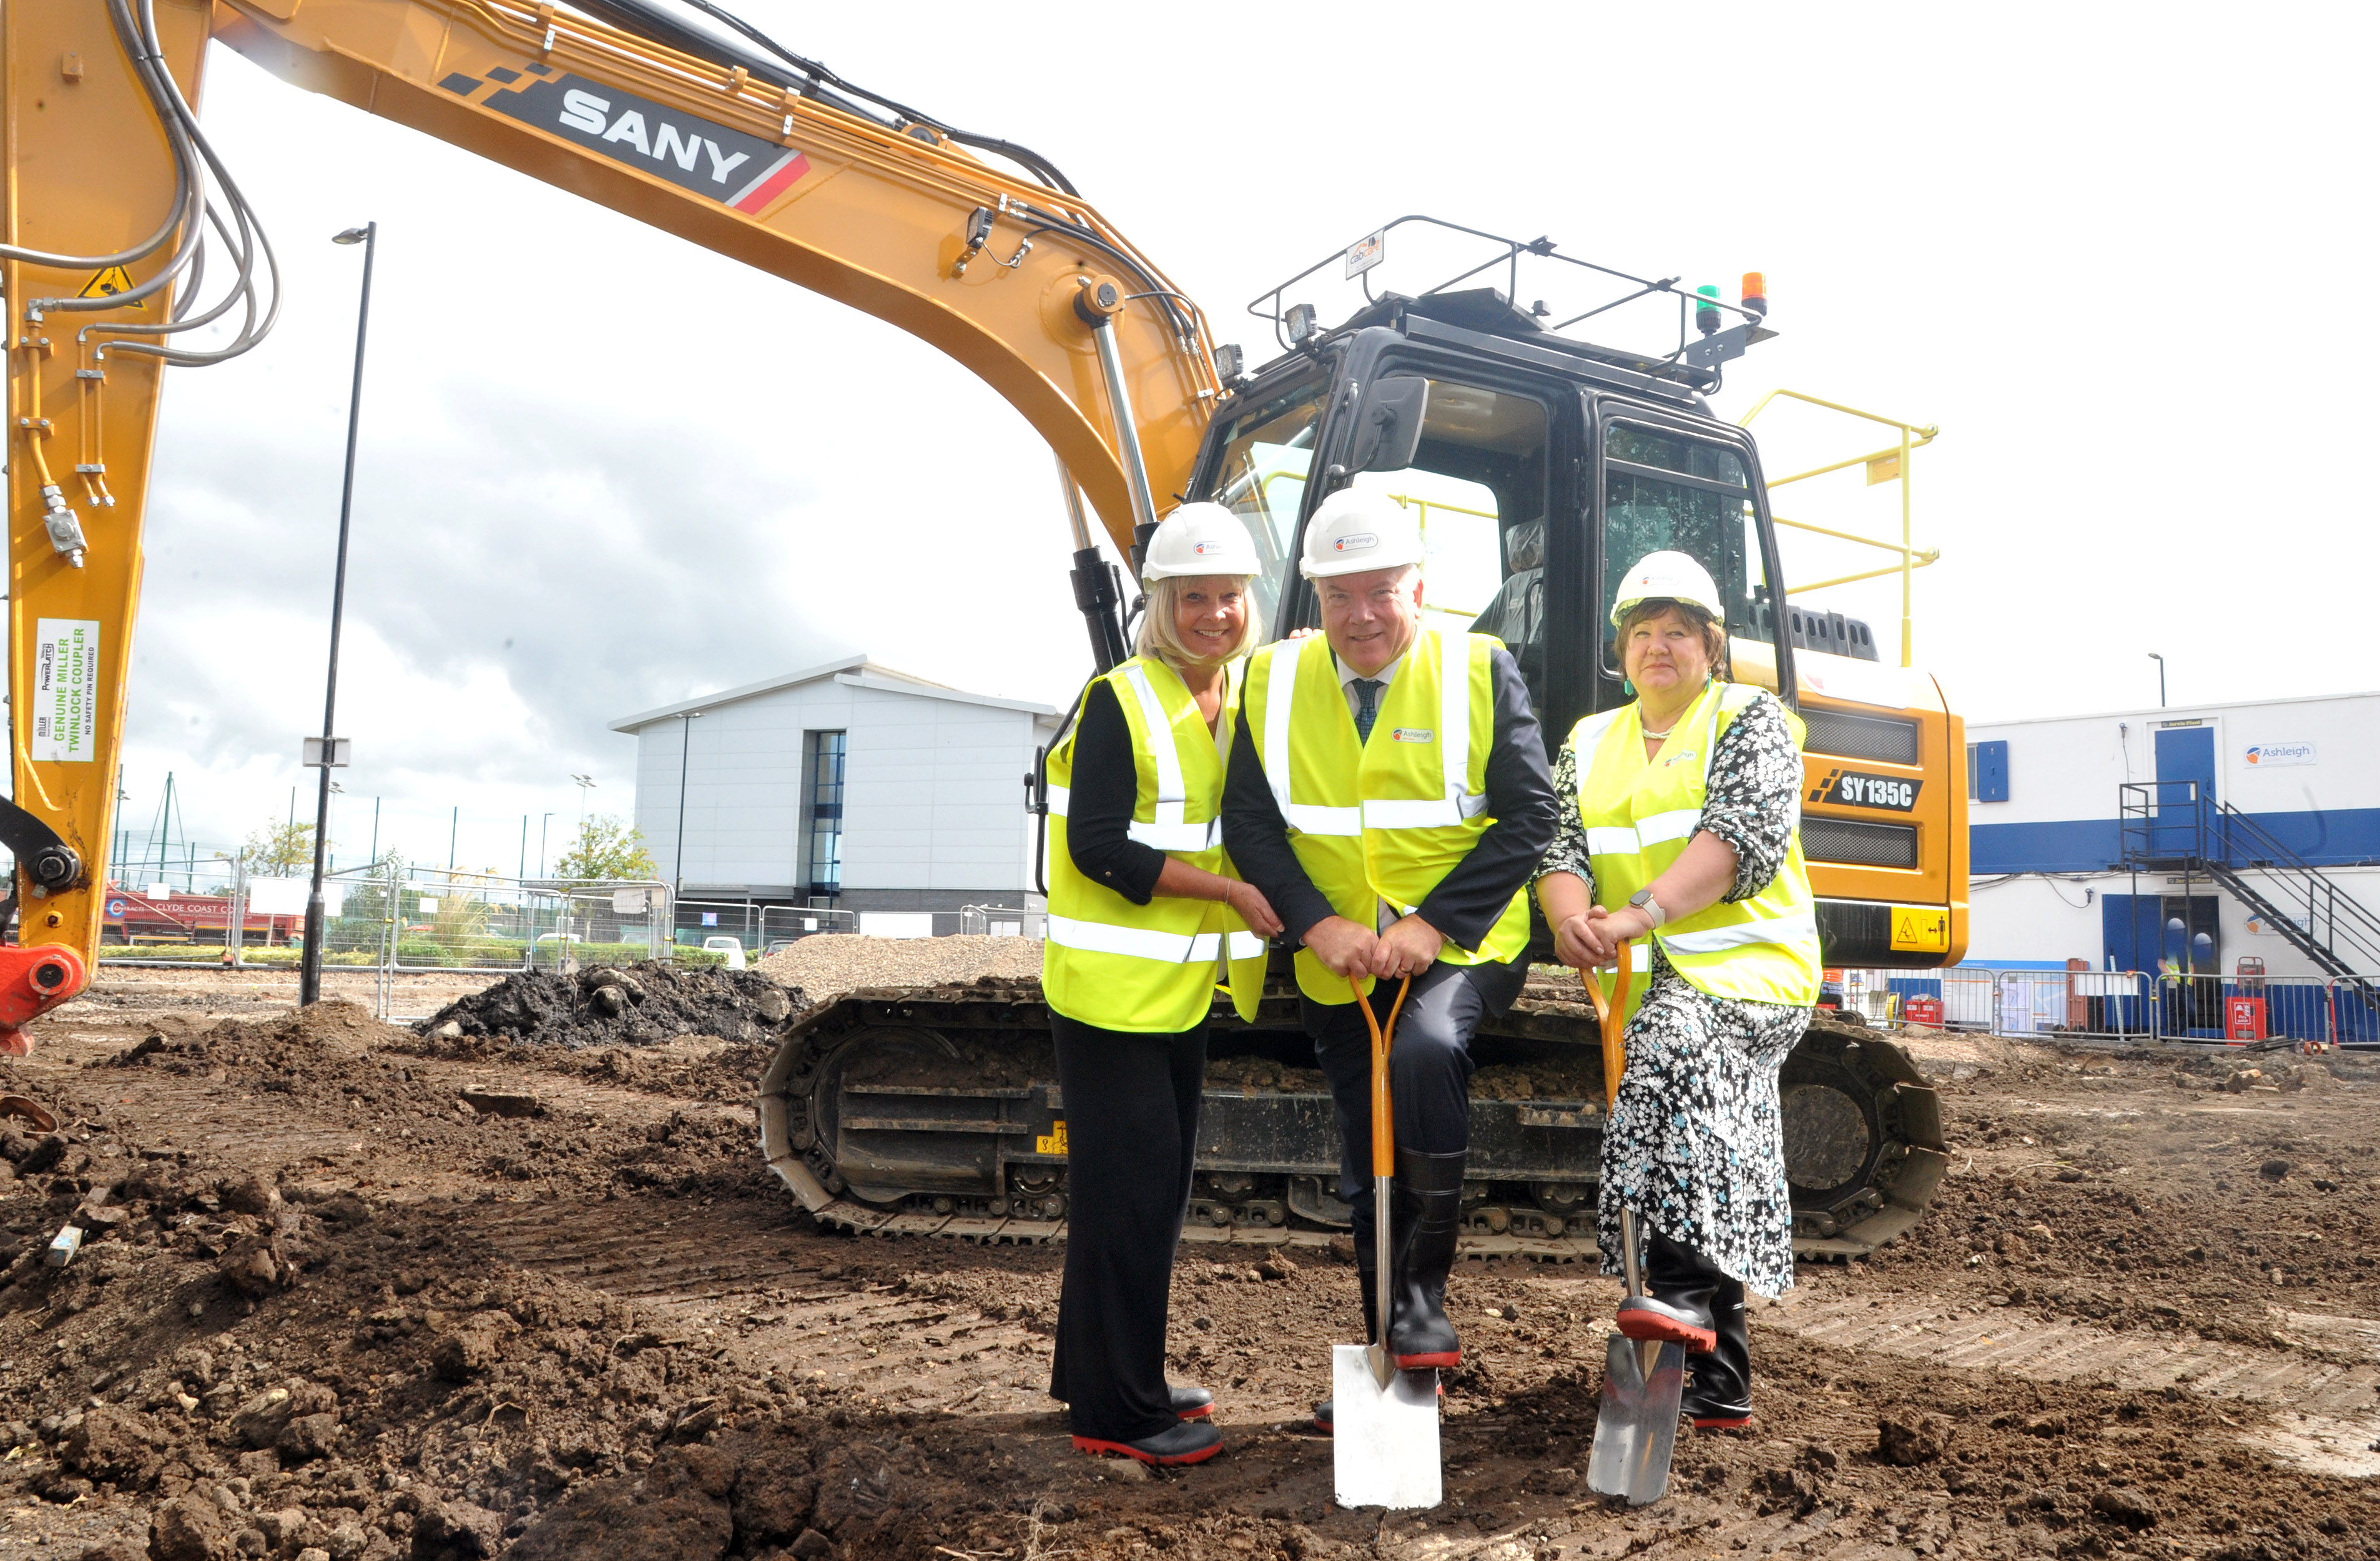 Main contractor appointed for Ayrshire College’s Willie Mackie Skills Hub